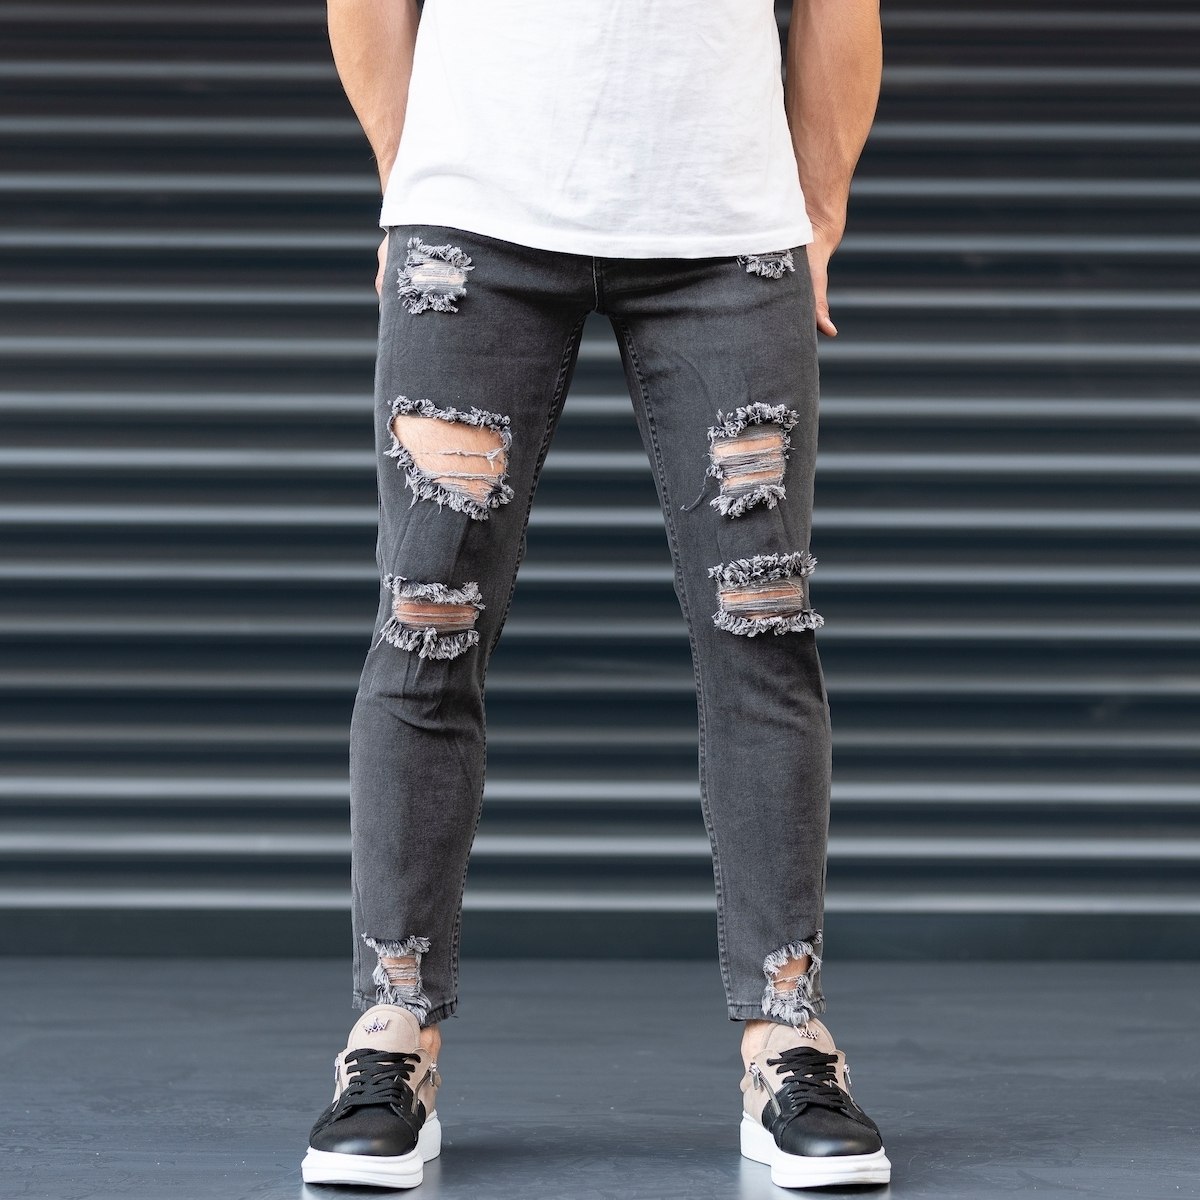 ripped jeans shoes